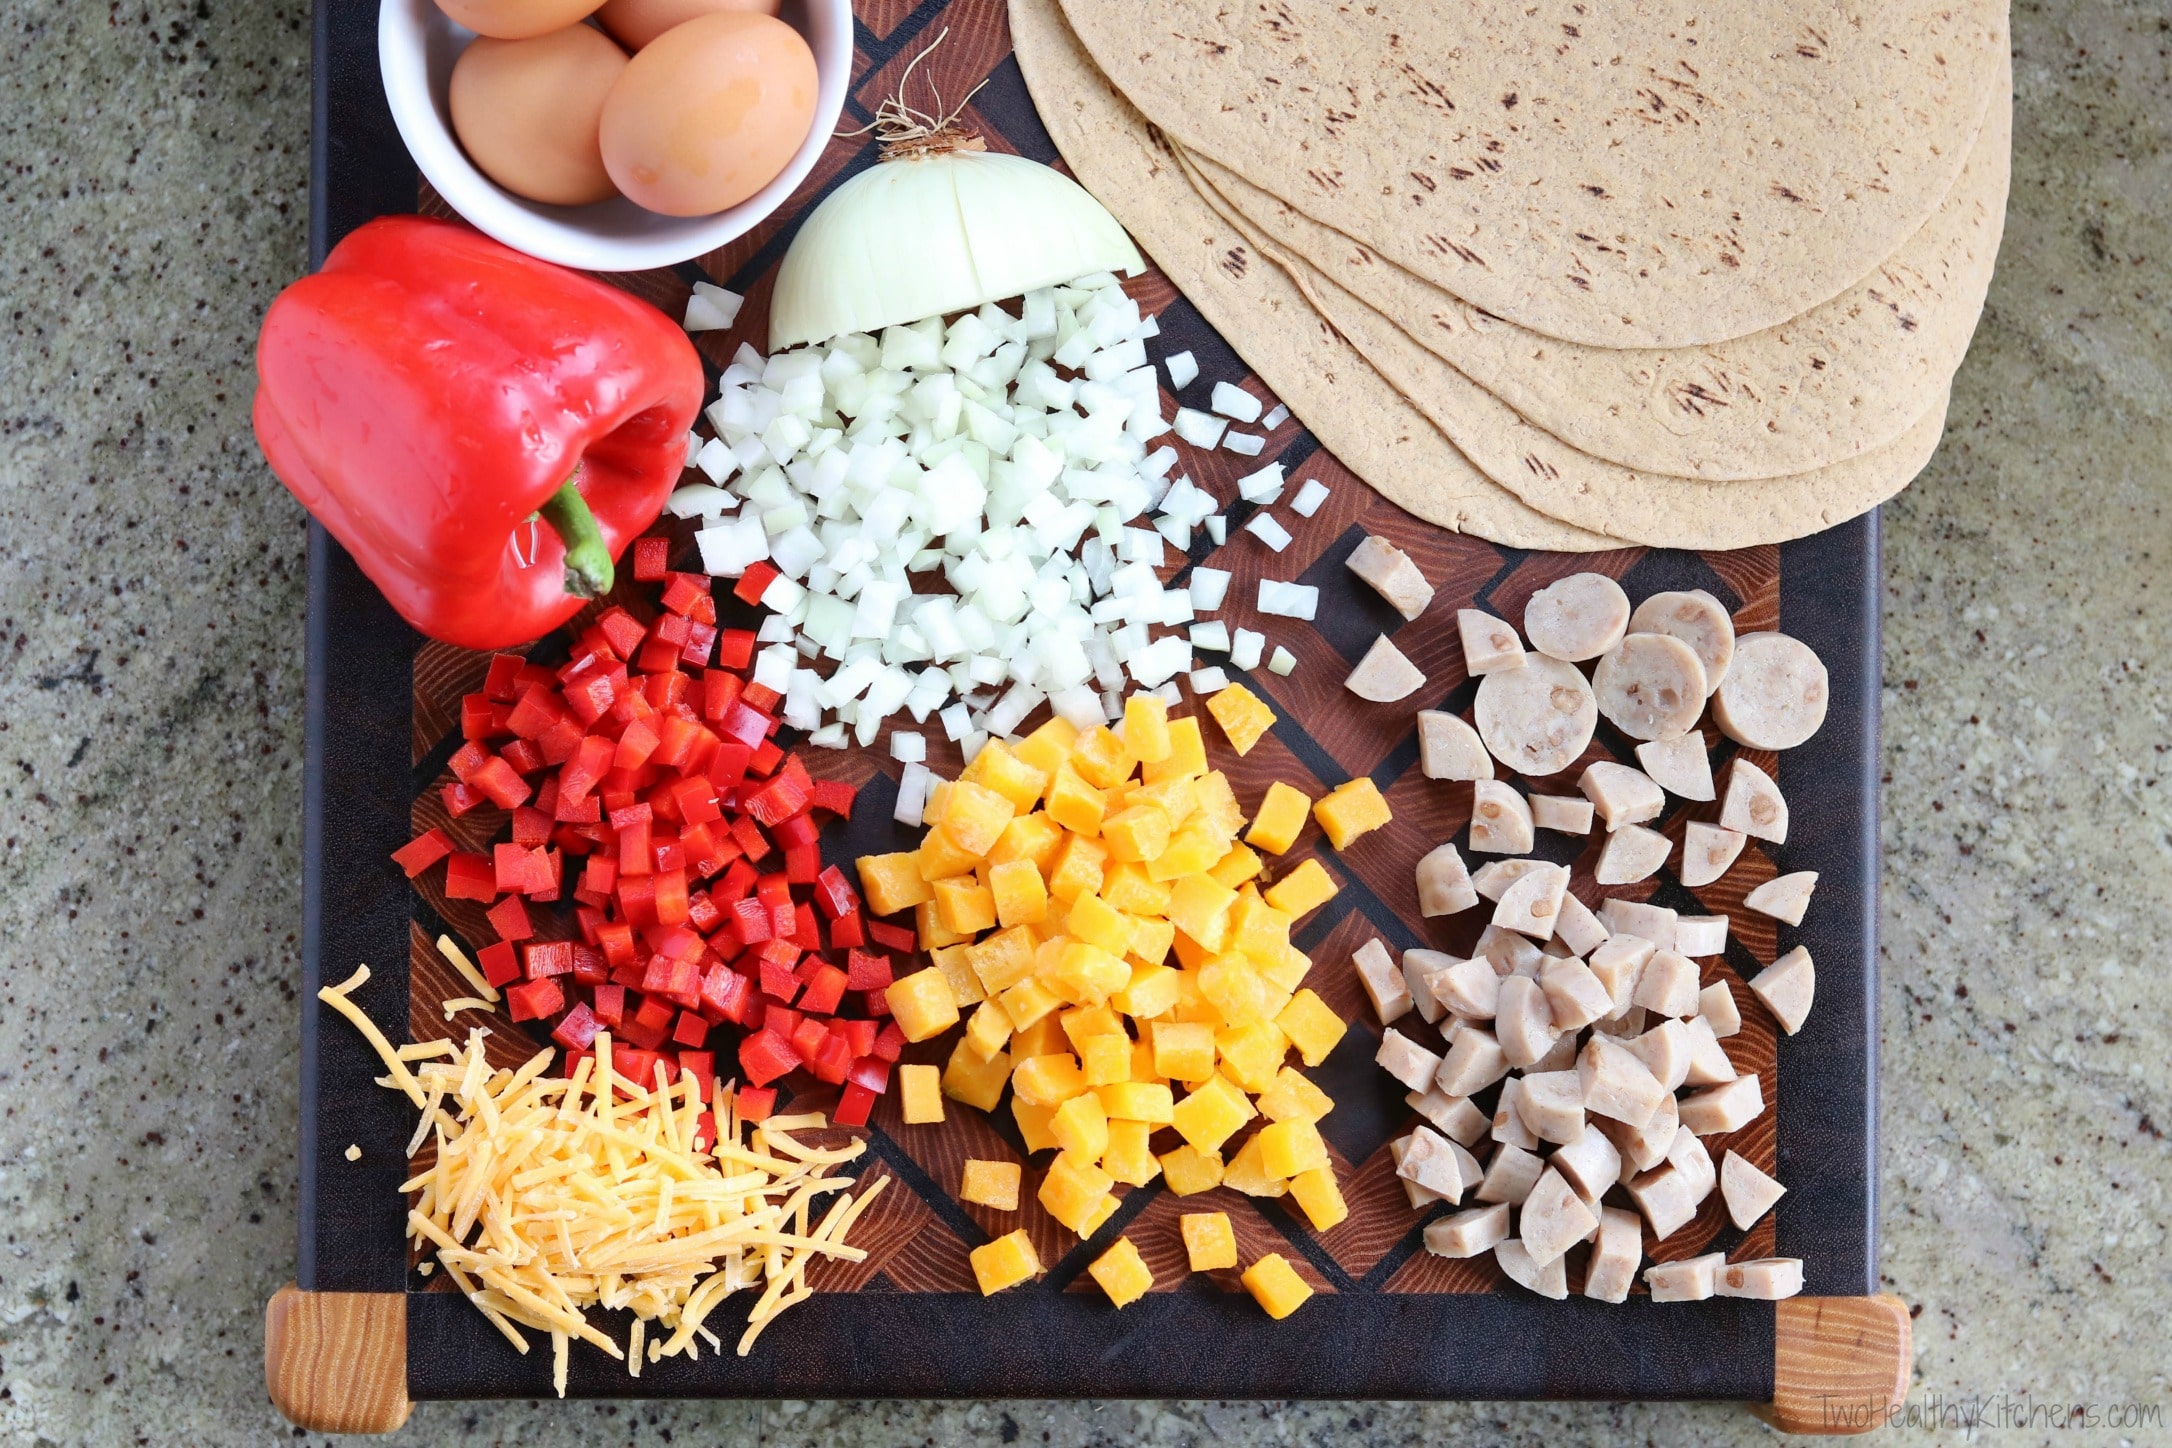 Burrito ingredients chopped in piles on cutting board, with whole red pepper, bowl of brown eggs and wraps.